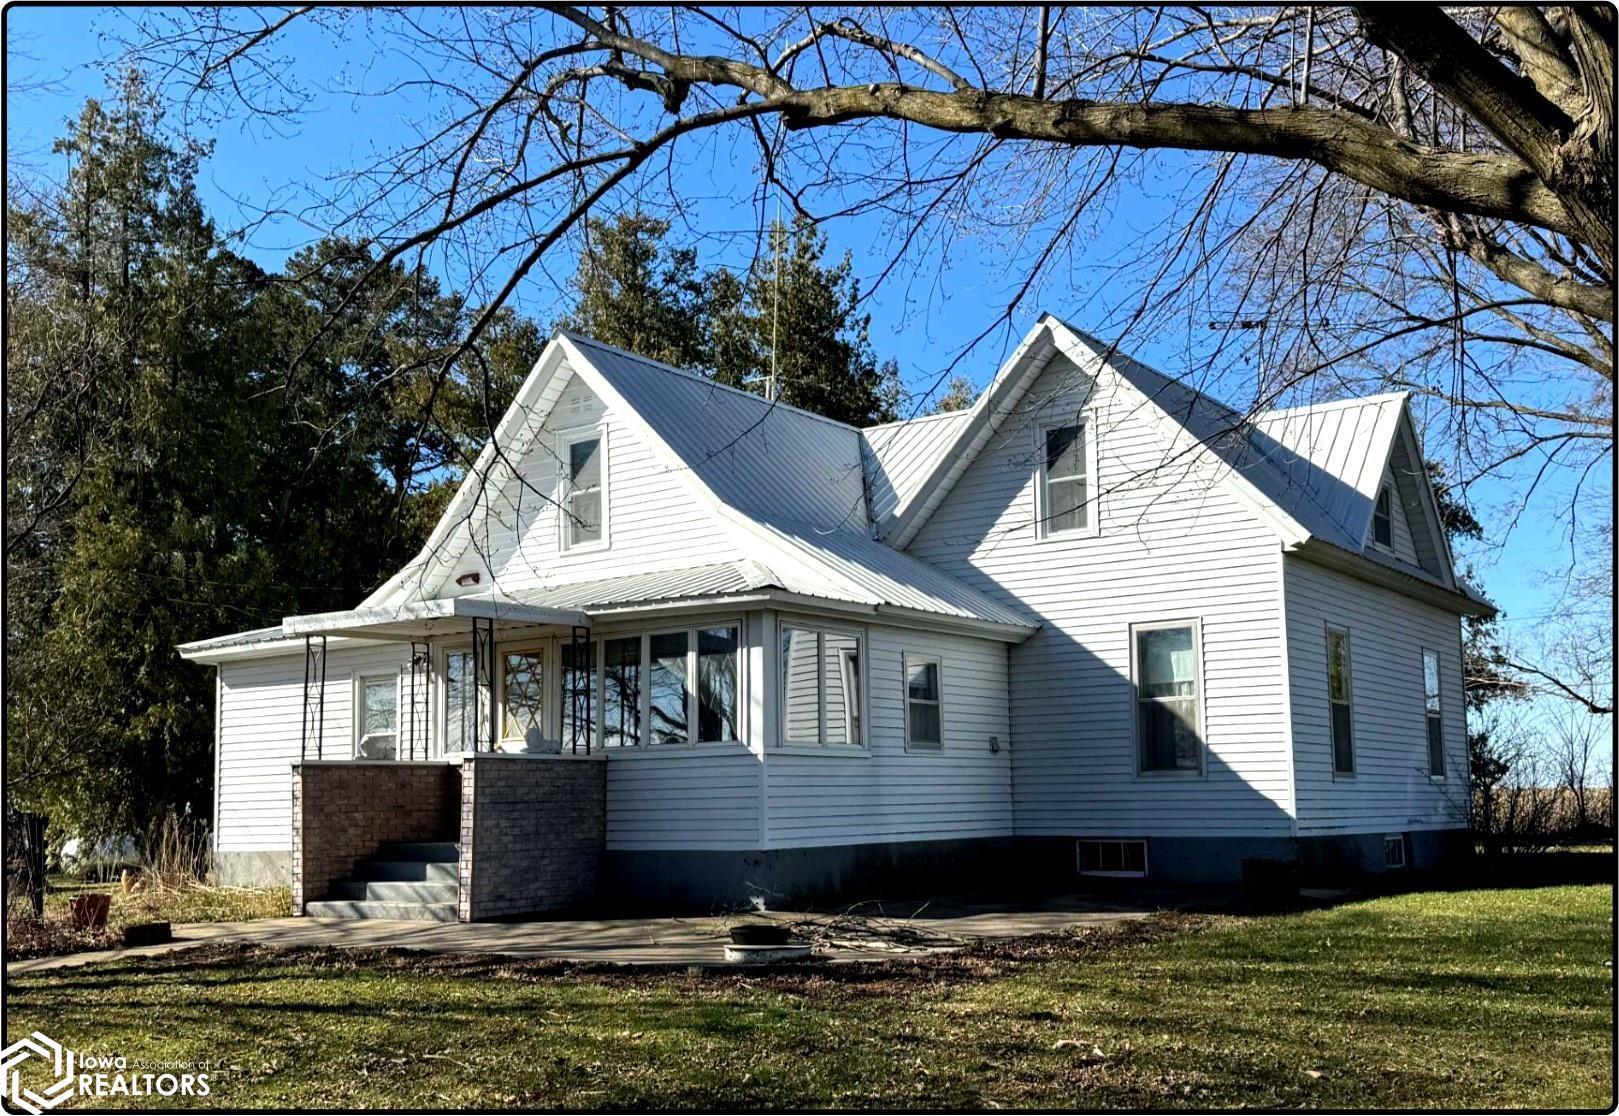 1668 155th St., Manchester, Iowa 52057, 4 Bedrooms Bedrooms, ,1 BathroomBathrooms,Farm,For Sale,155th St.,6316100